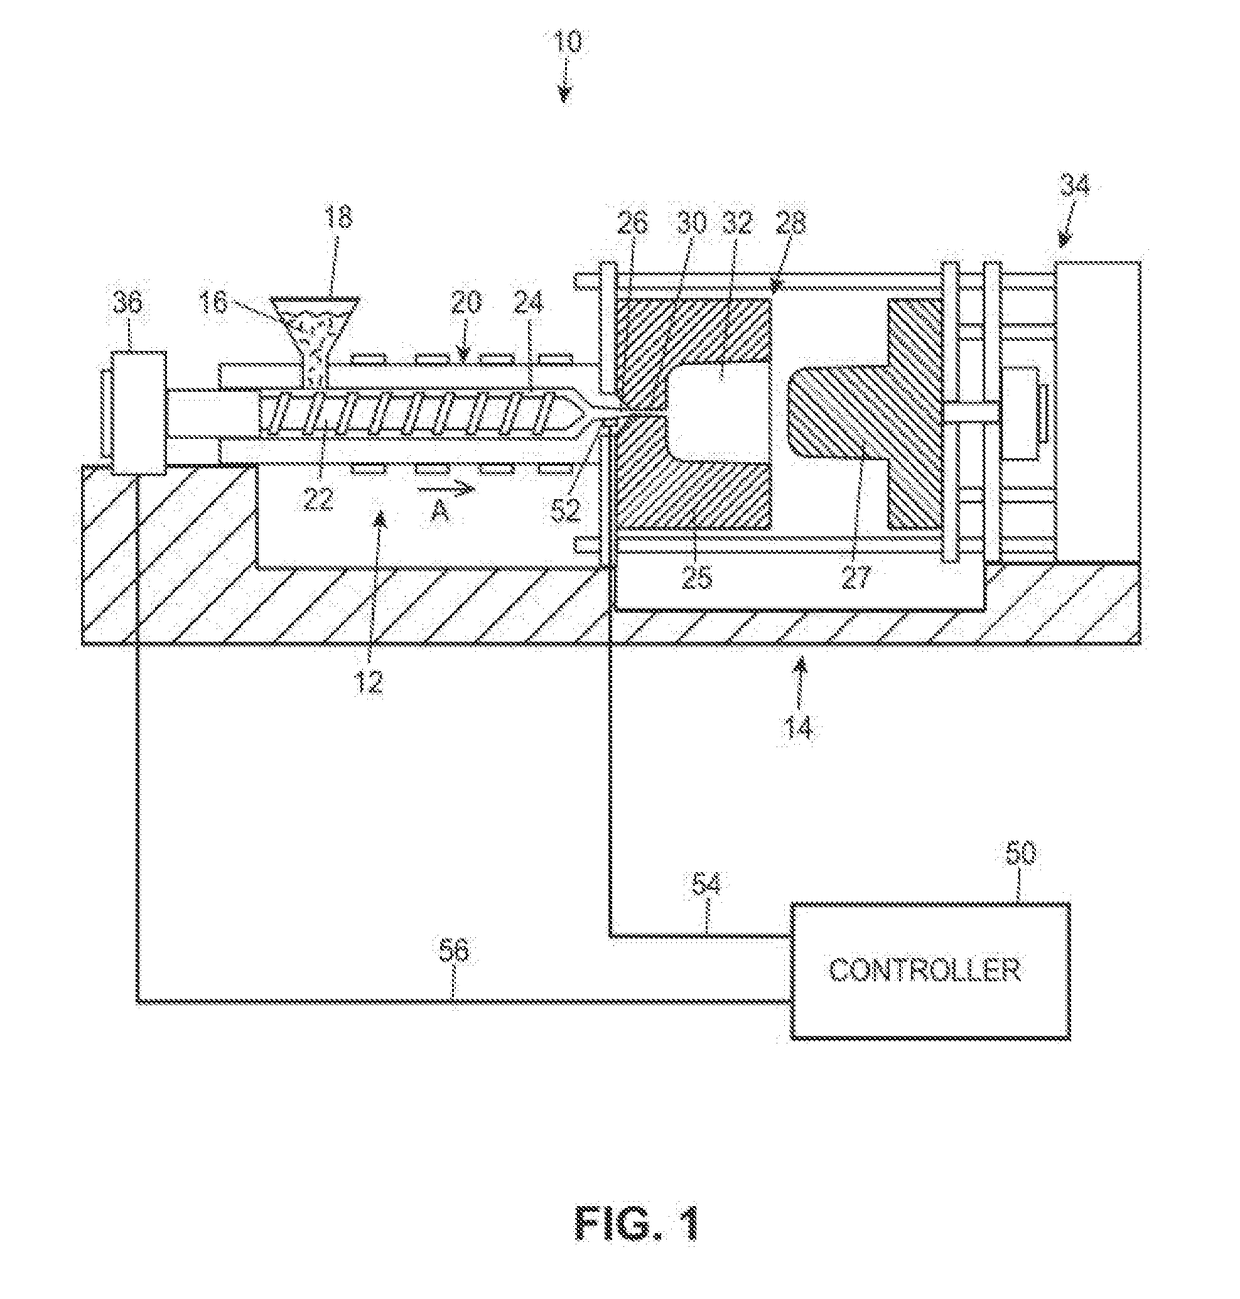 Co-injection with continuous injection molding